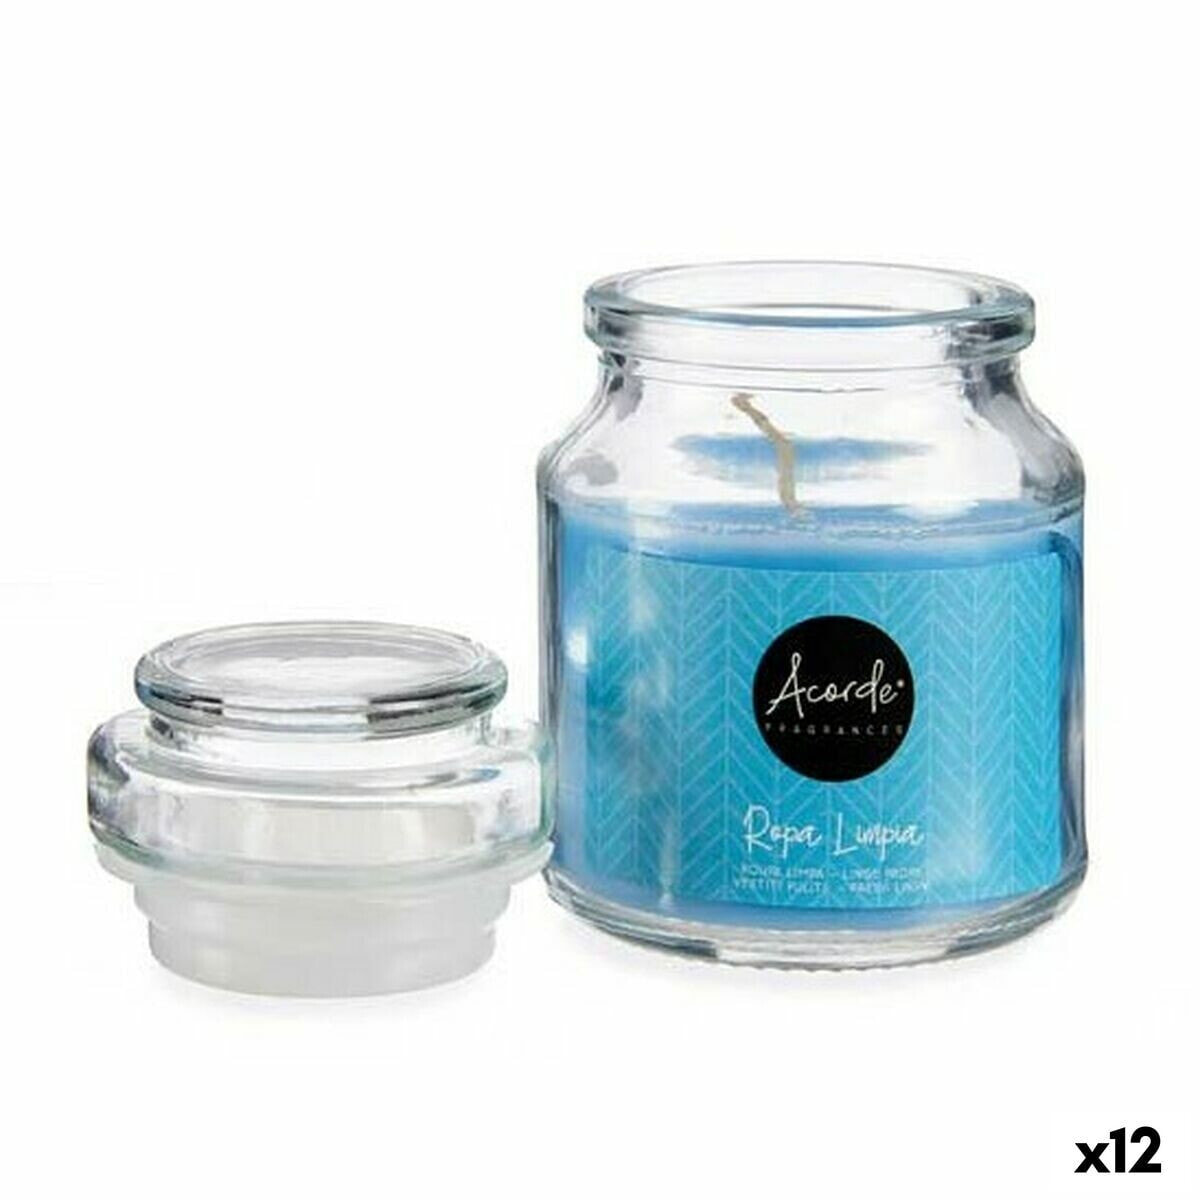 Scented Candle Clean Clothes 7 x 10 x 7 cm (12 Units)